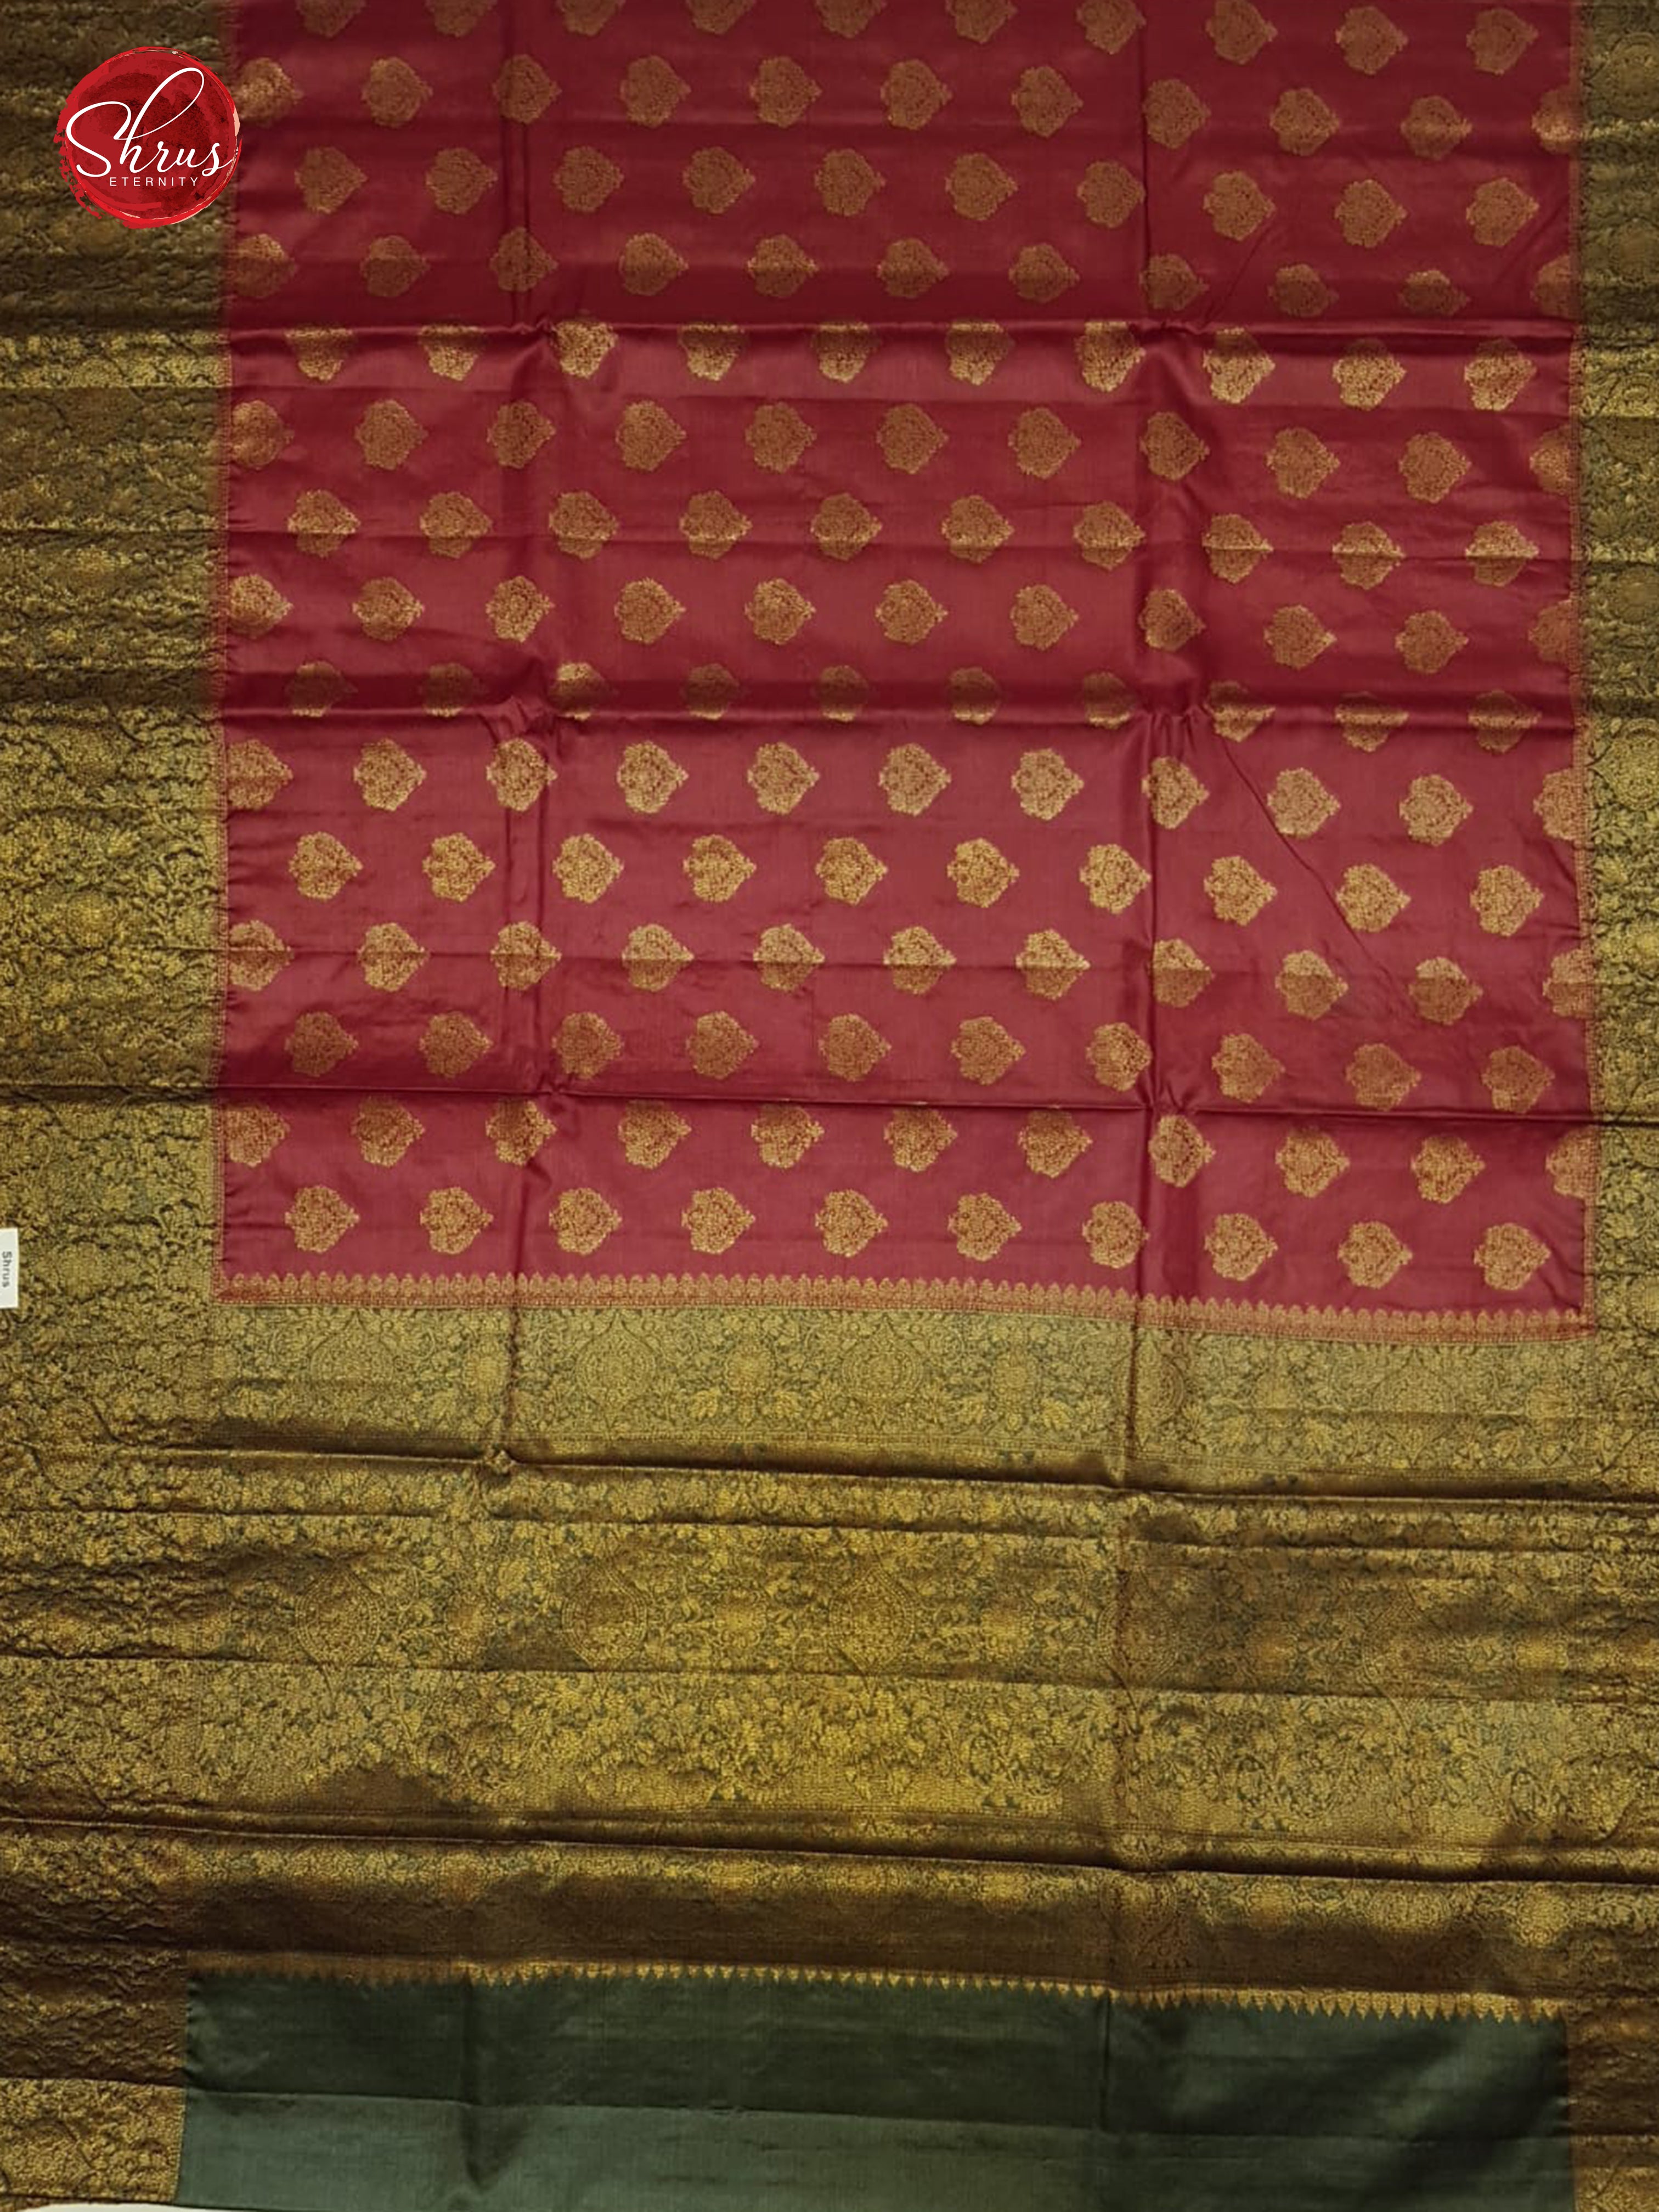 Red & Grey - Tussar with zari woven floral motifs  on the body &  Contrast  Zari Border - Shop on ShrusEternity.com